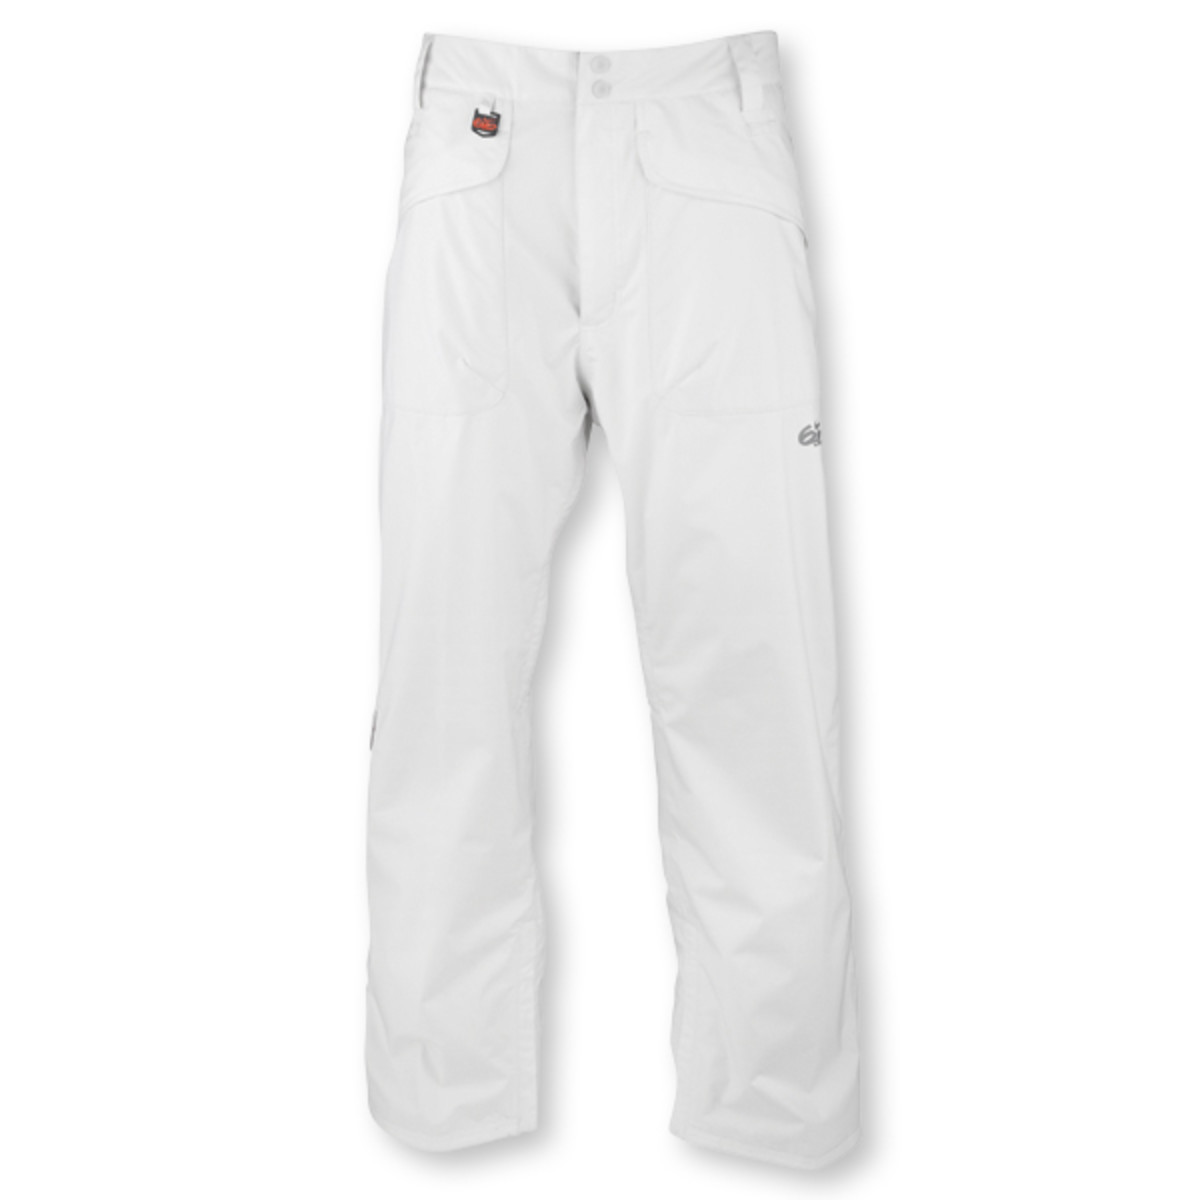 Nike 6.0 Noroc Pant 2011 - Snowboarder